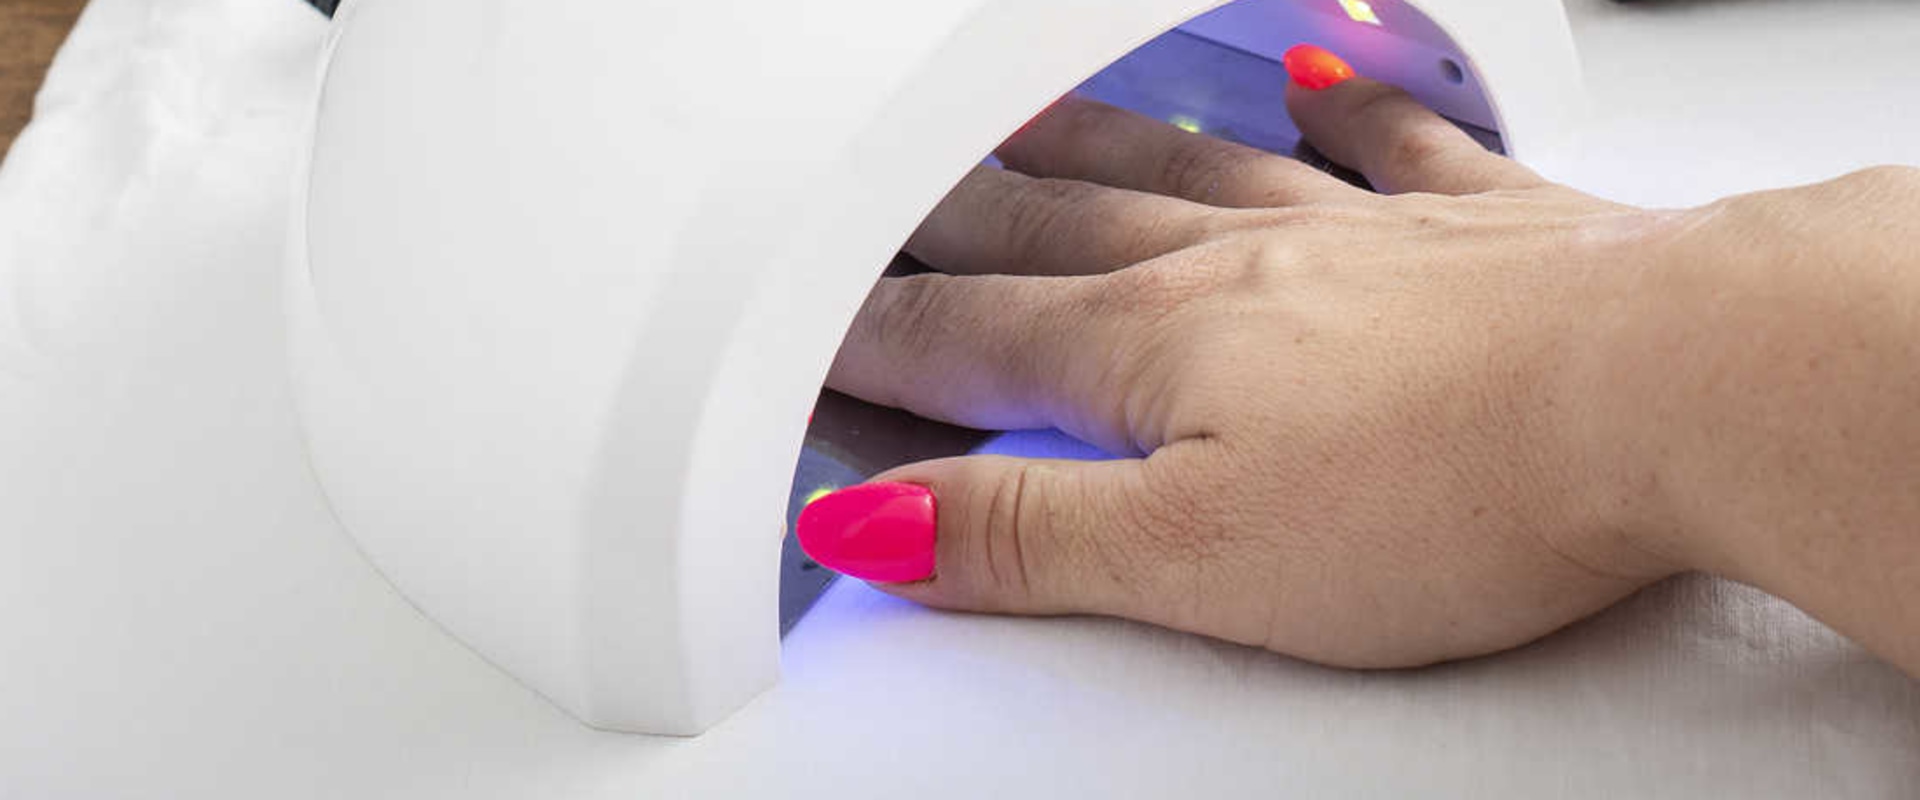 Is UV Light Safe for Nails? An Expert's Perspective